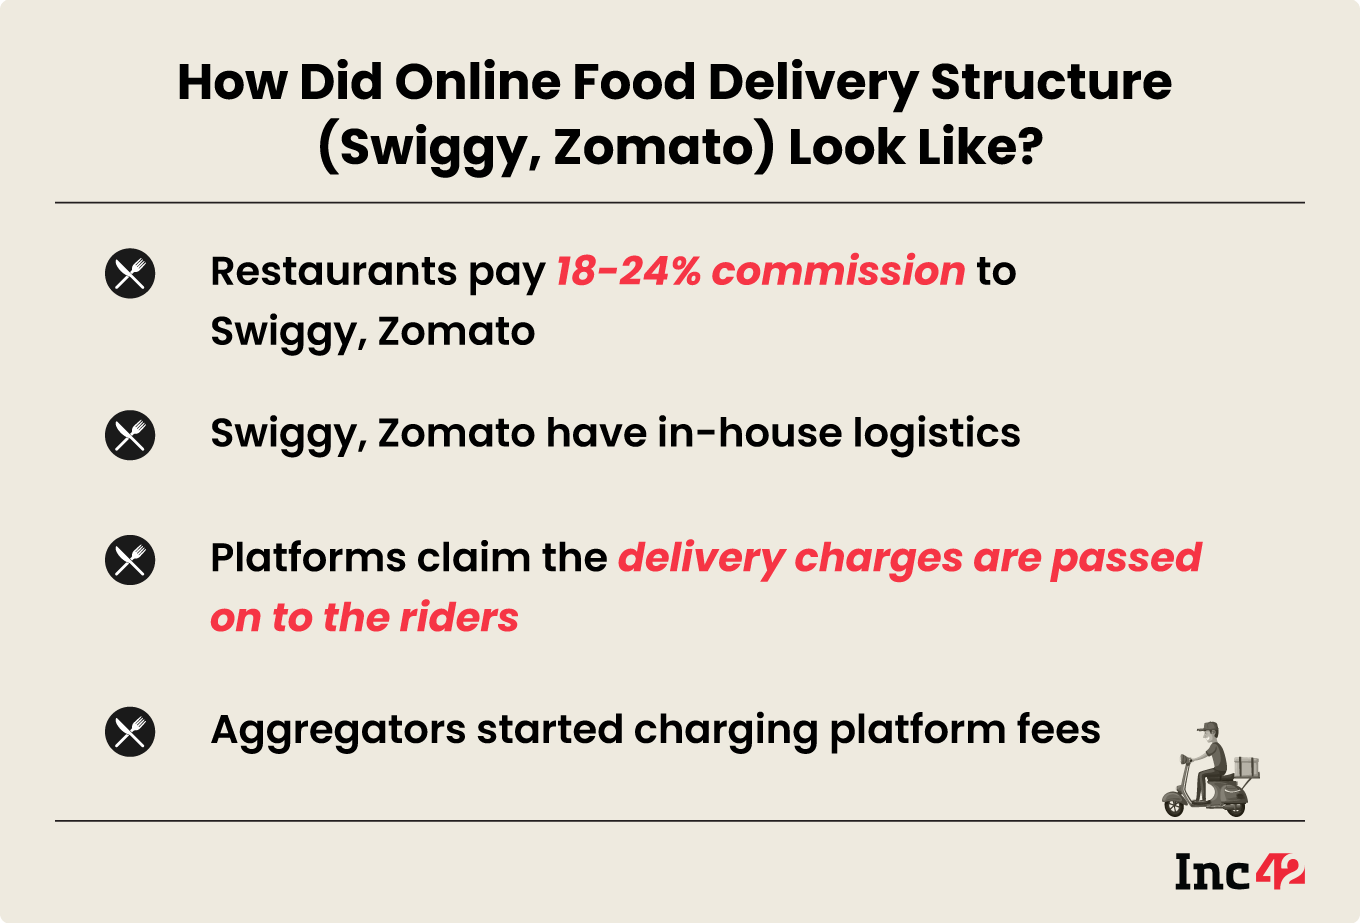 How did online food delivery structure (swiggy, zomato) look like